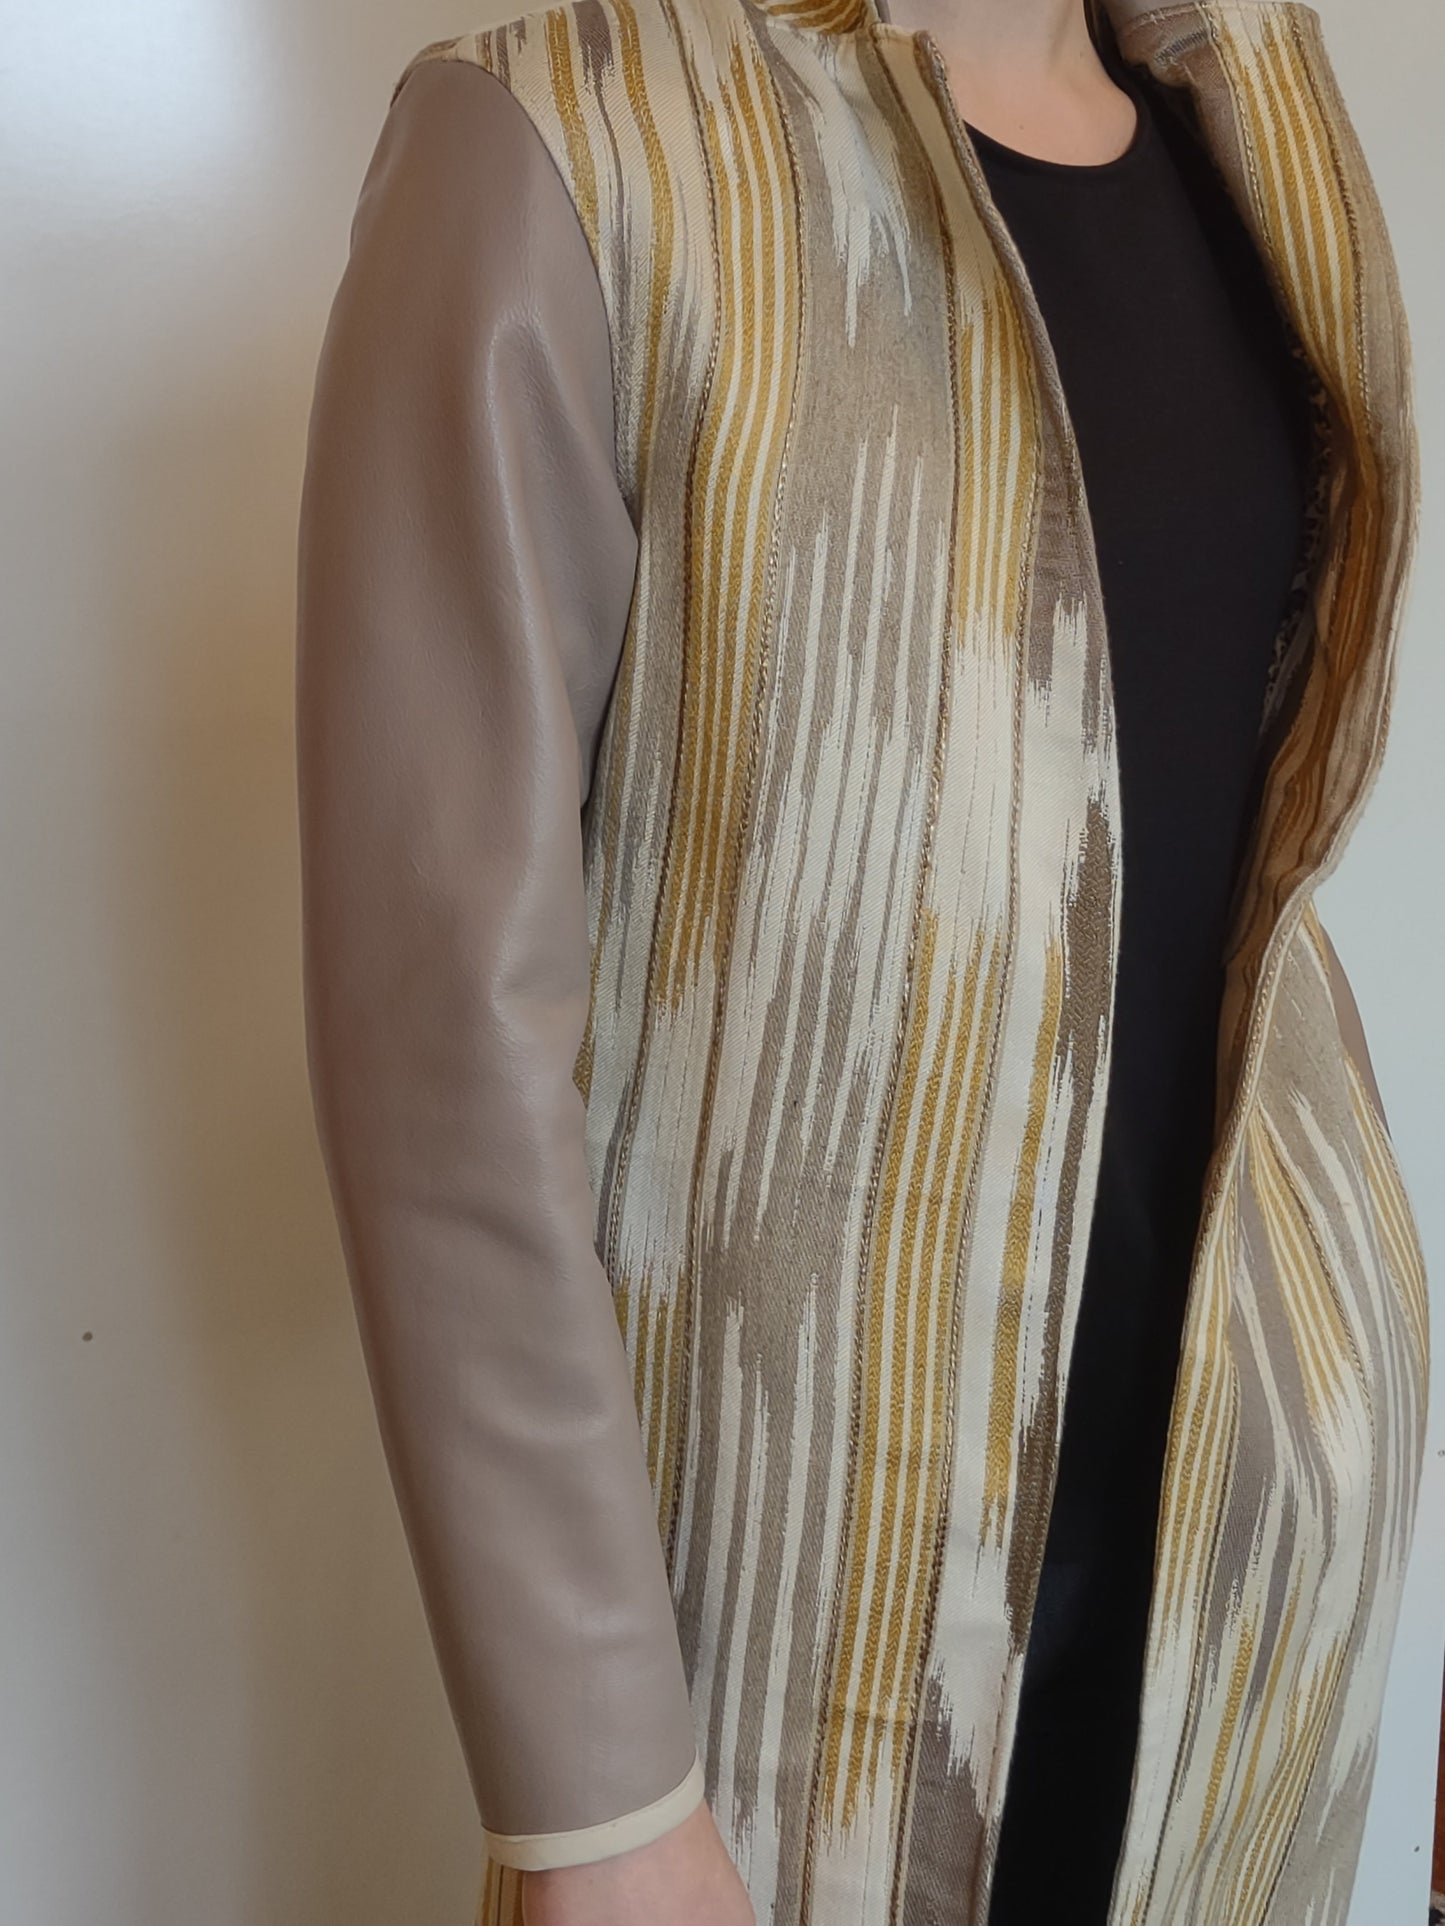 Yellow, Tan, and Cream Woven Textile Car Coat with Leather Embellishment